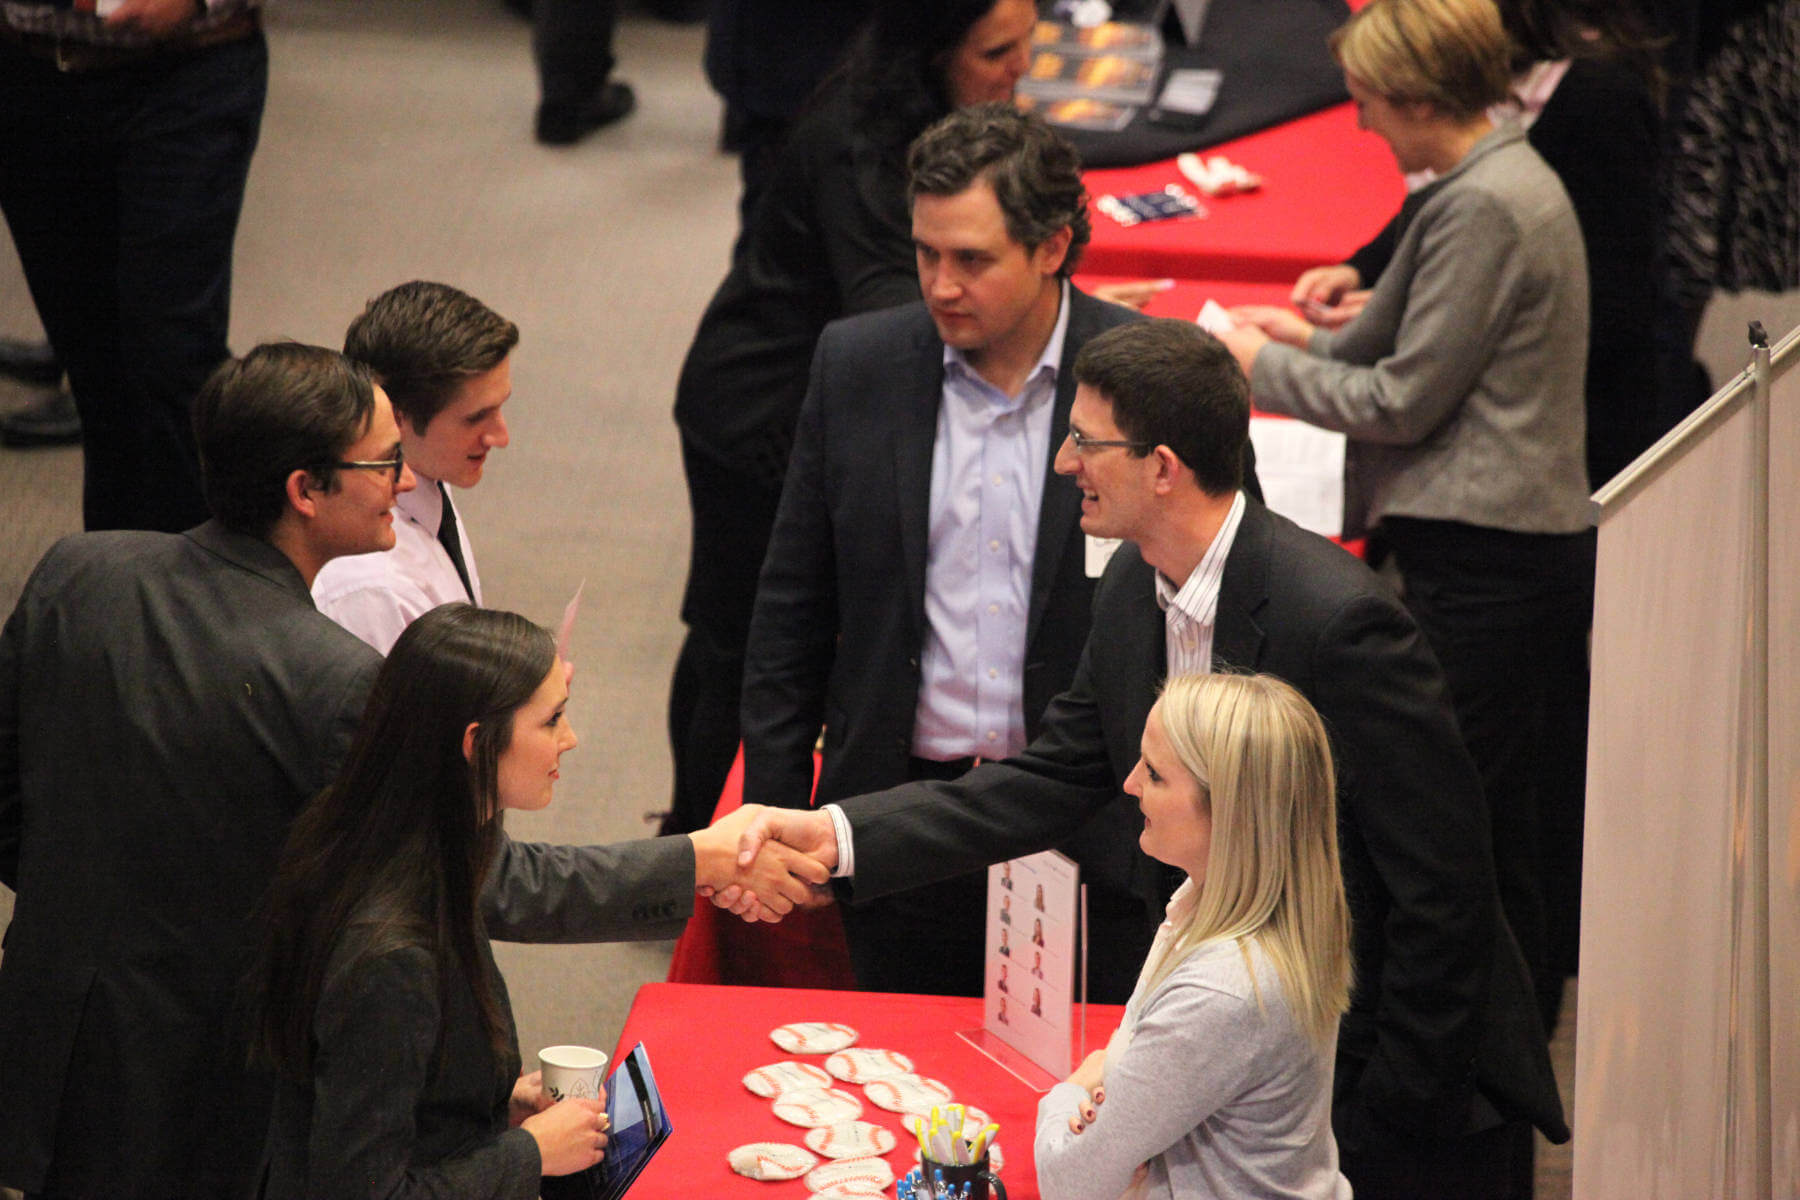 Alumni shaking hands at event